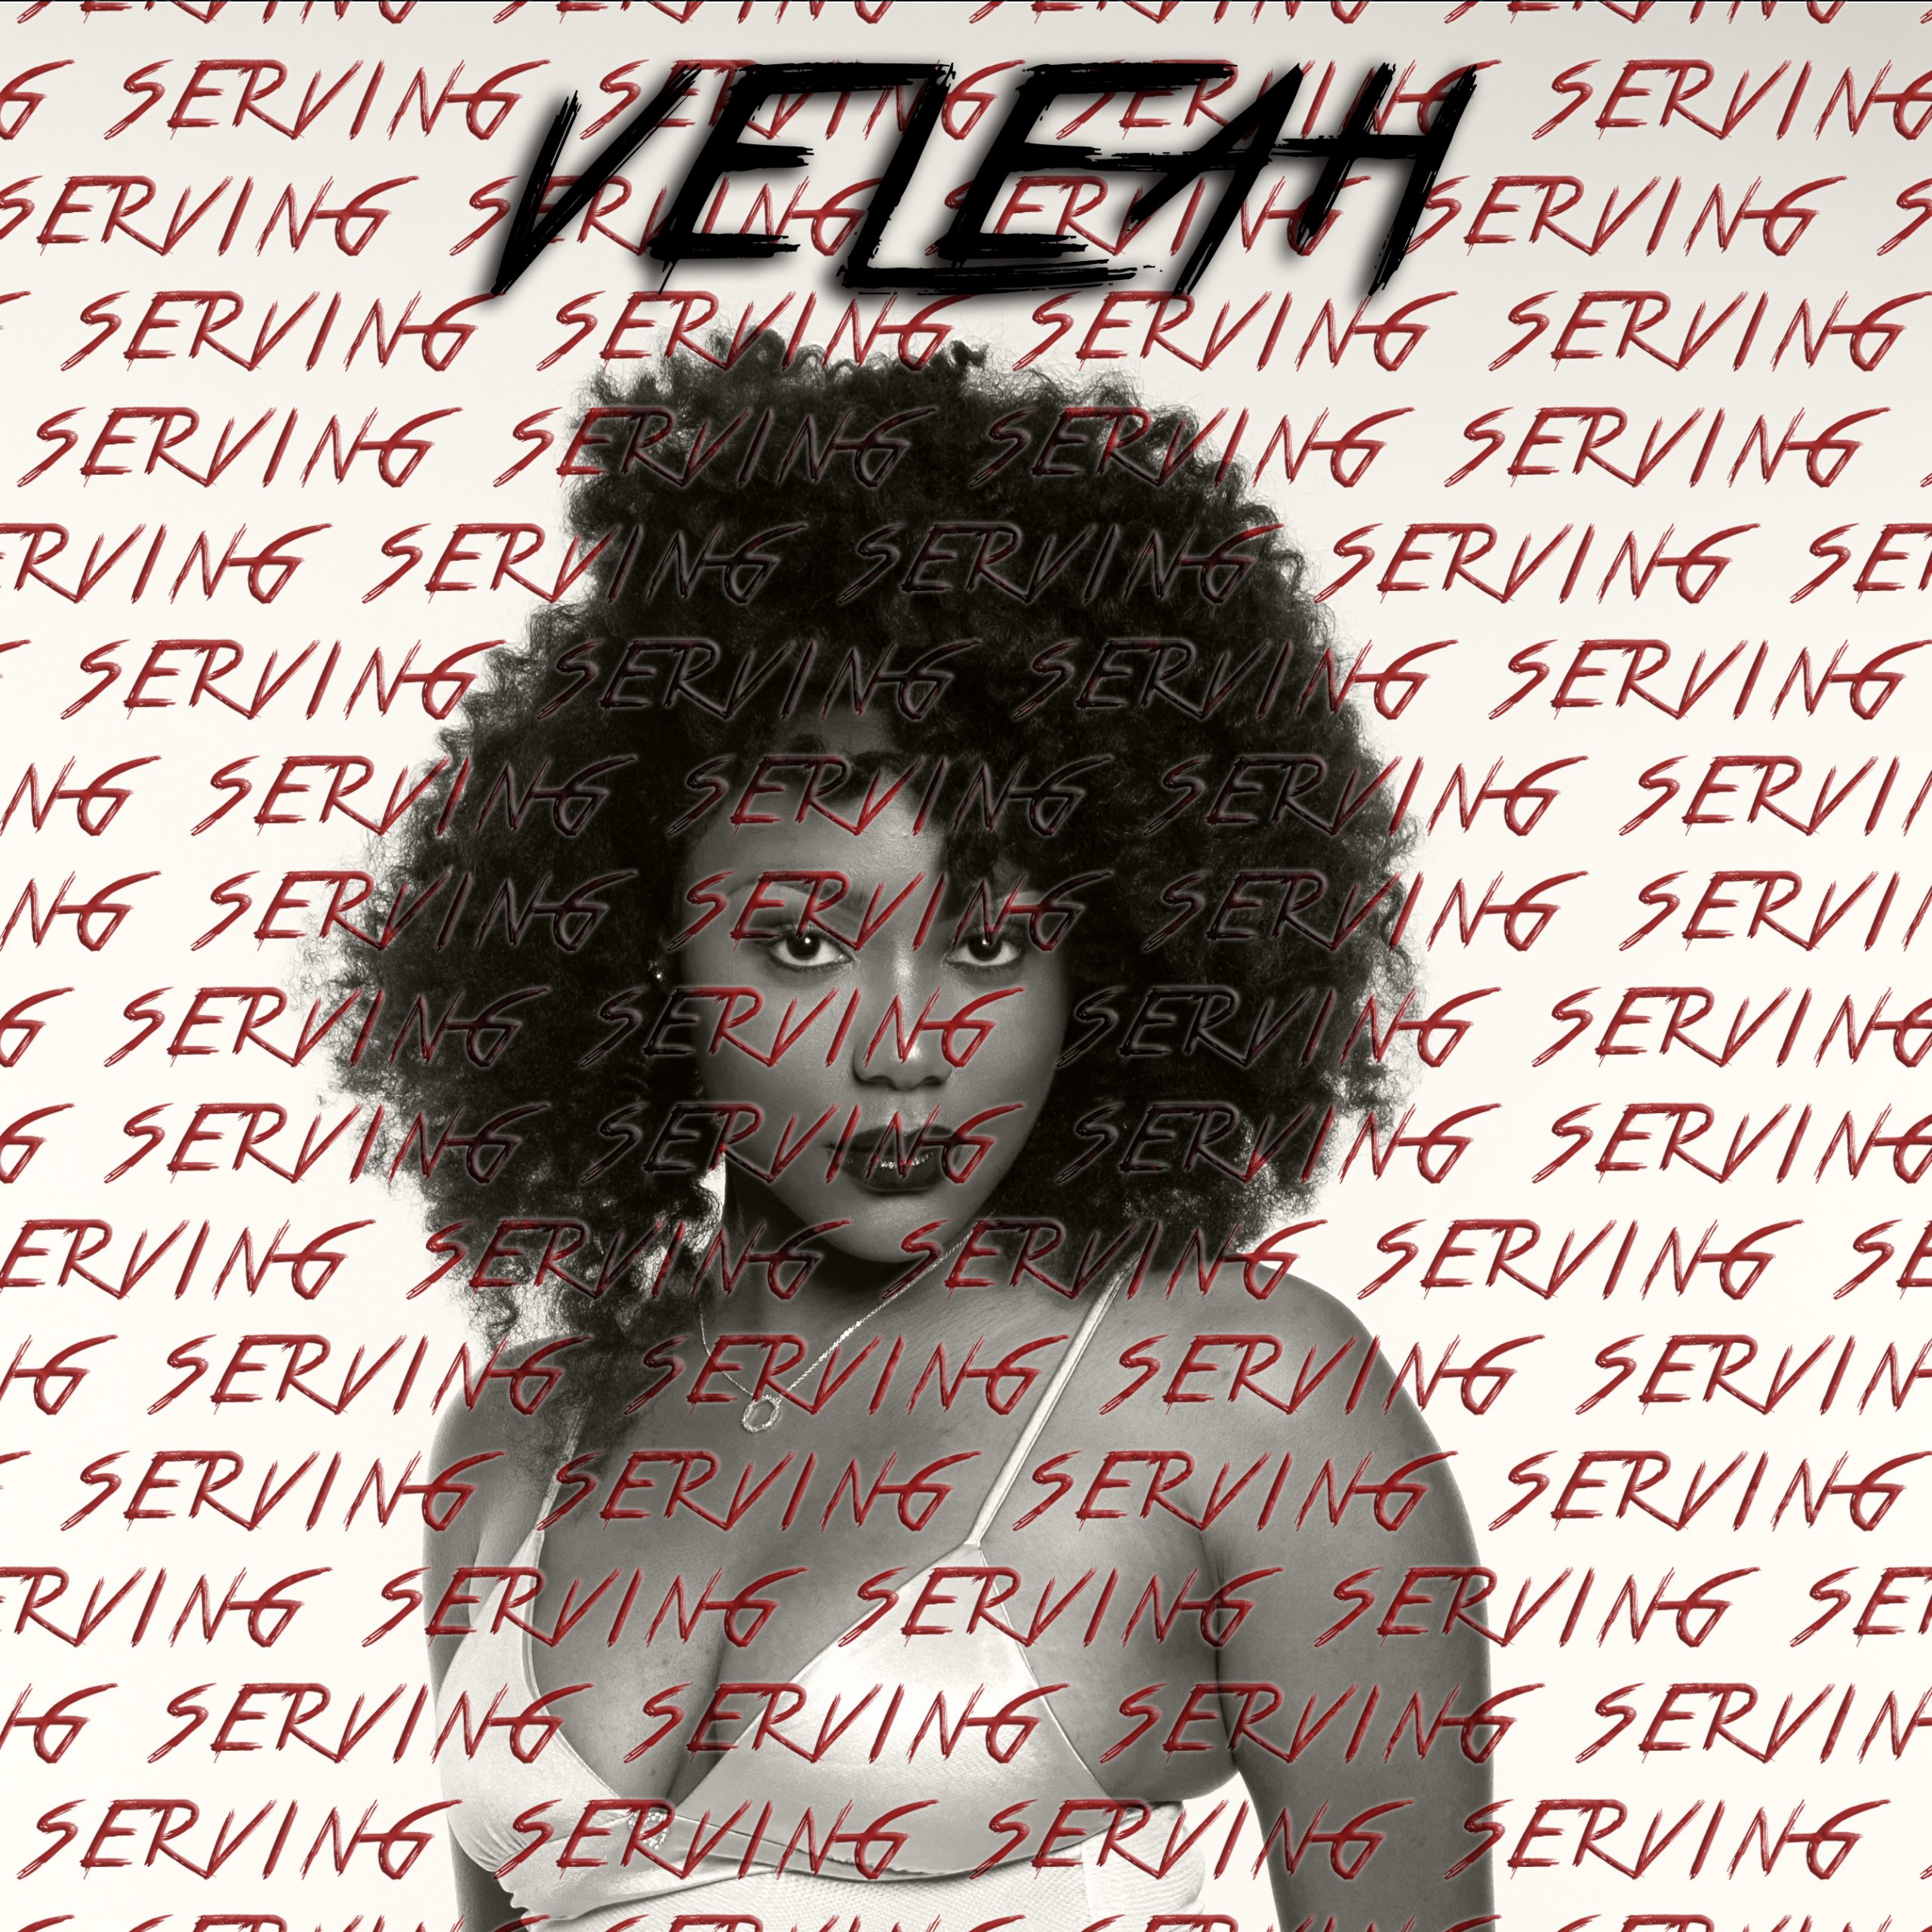 Connecticut-native ‘VeLeah’ releases her latest single ‘Serving’ in April 2022